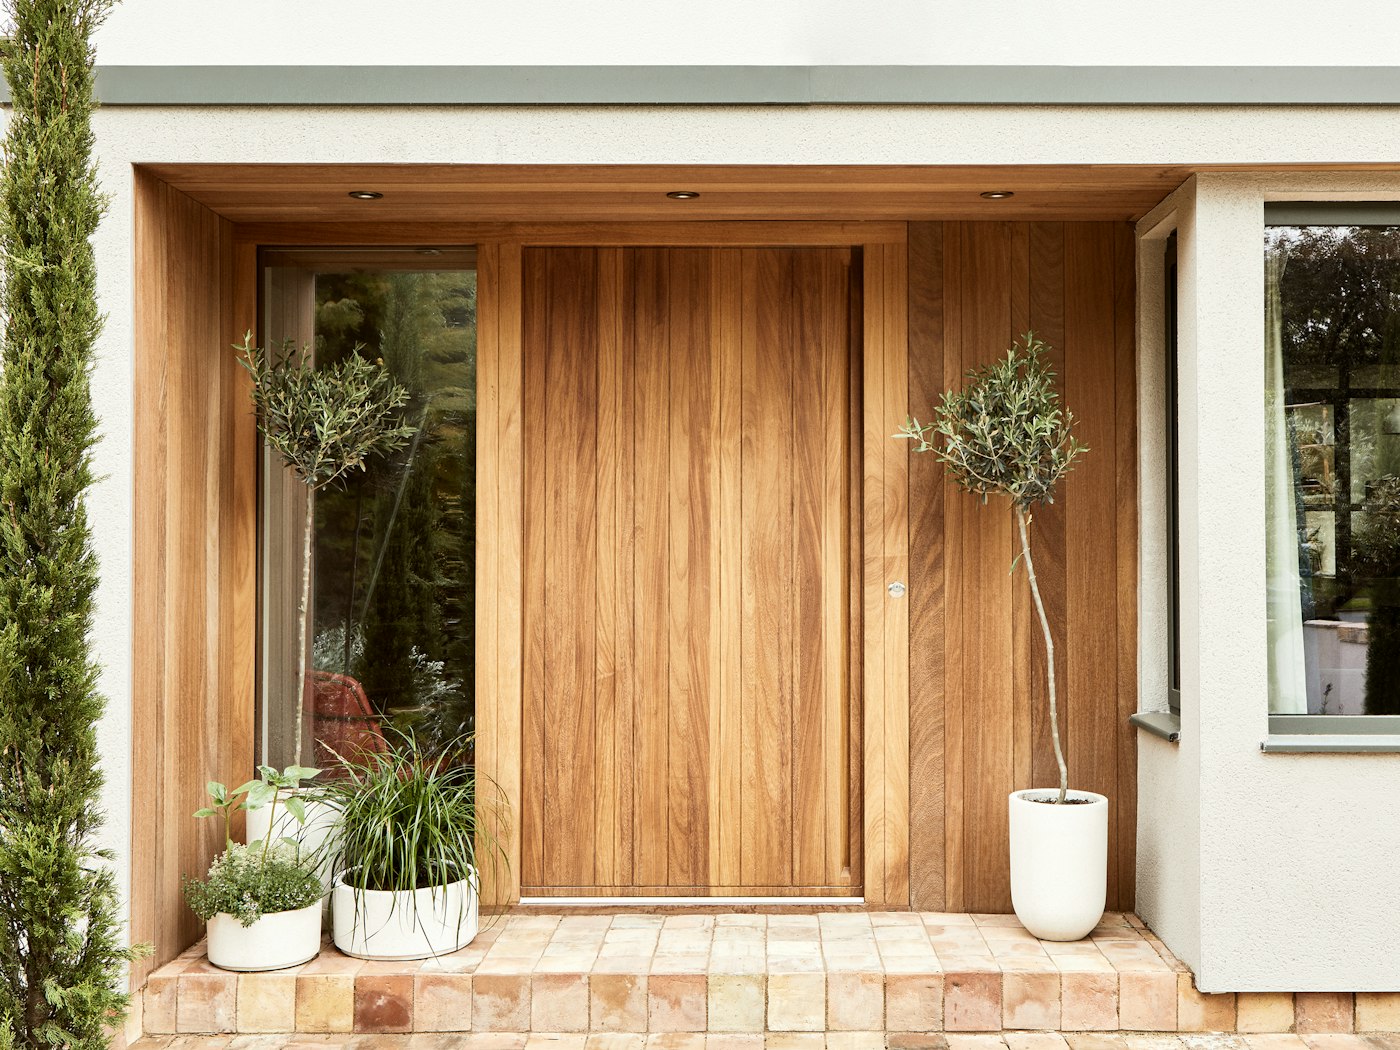 Natural hardwood is the perfect material for statement or understated doors